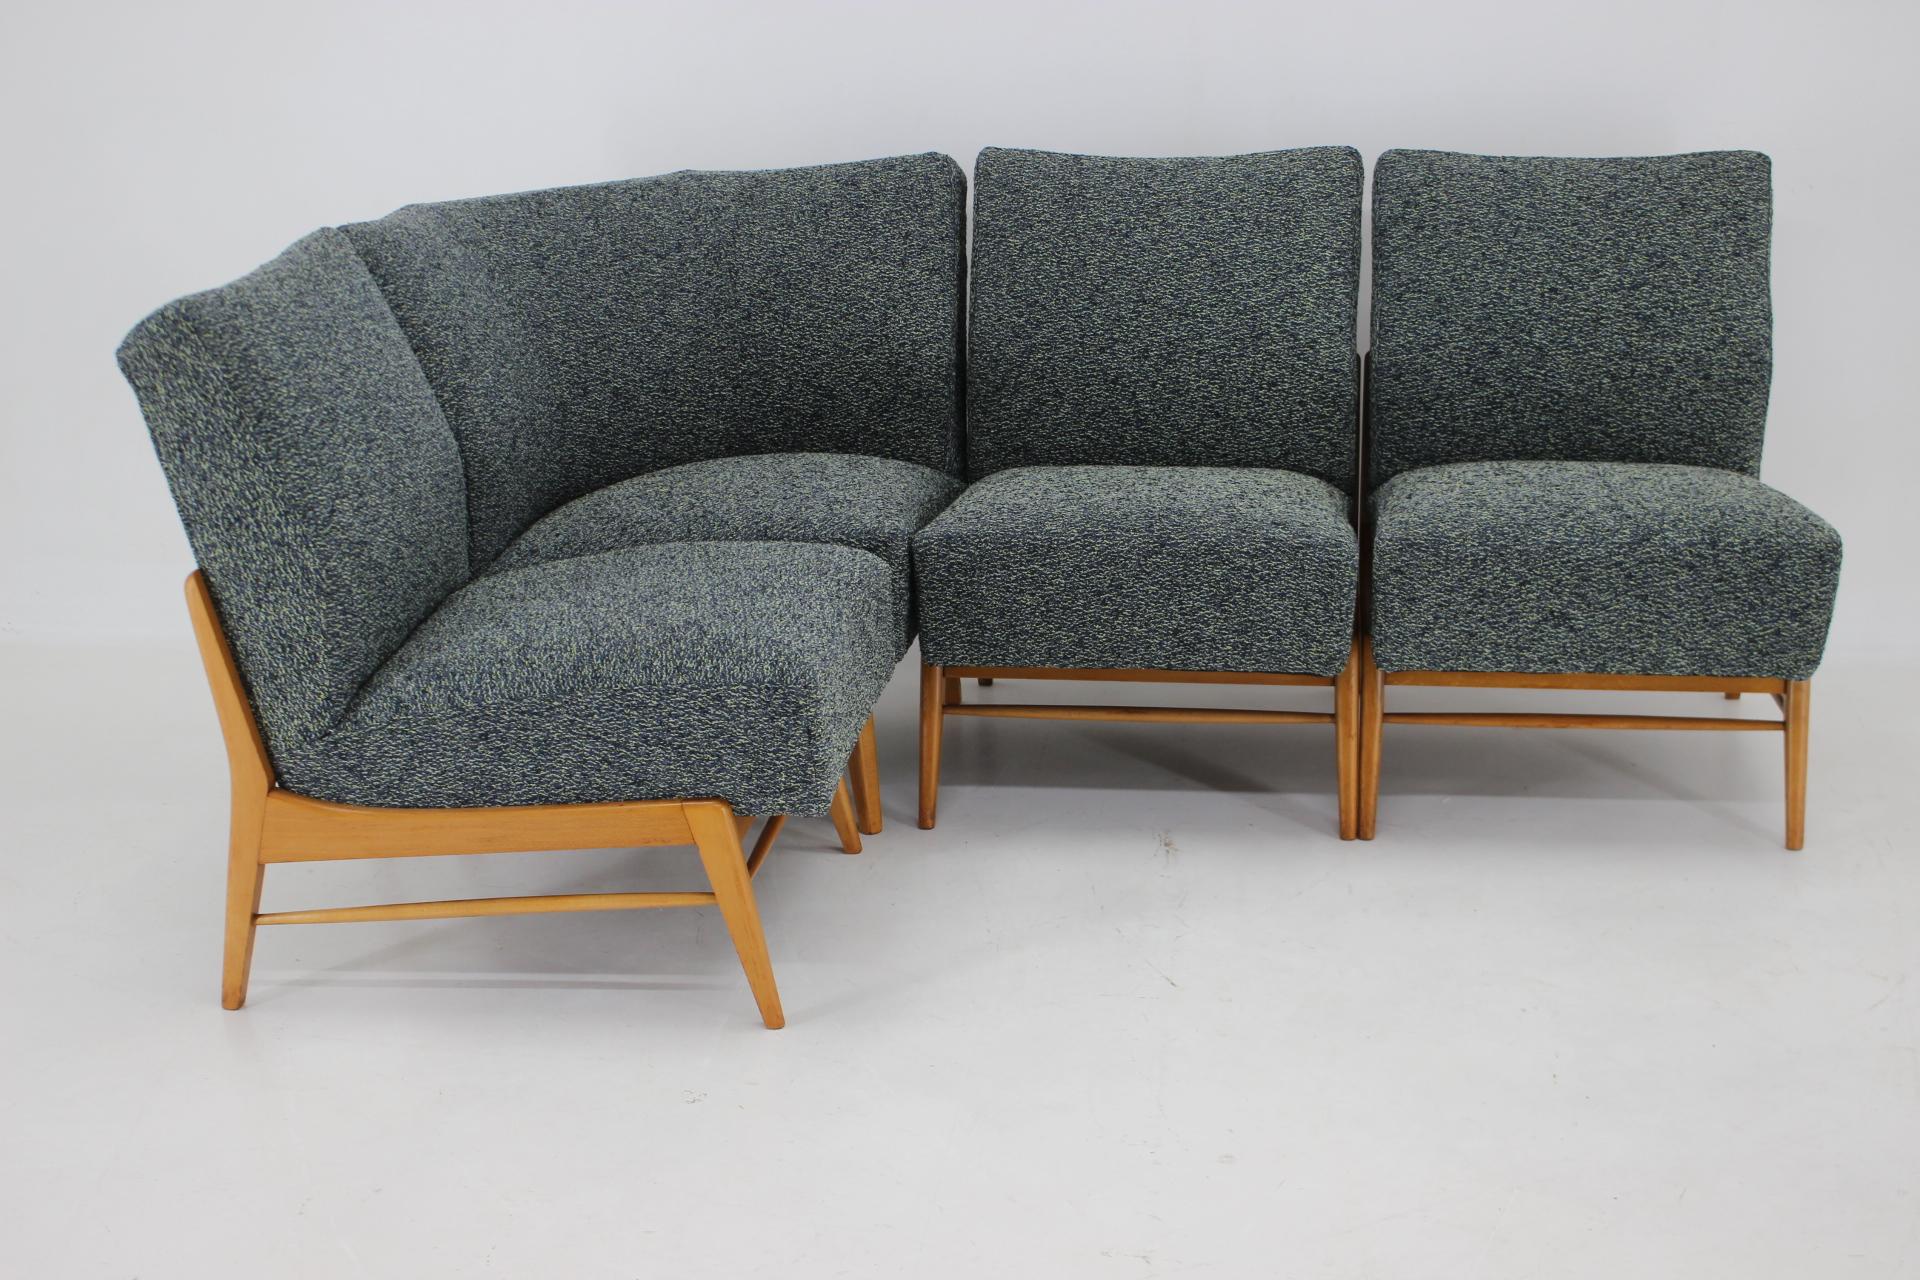 Mid-Century Modern 1970s Modular Sofa or Chairs in Beech wood and Kirgby Fabric, Czechoslovakia For Sale